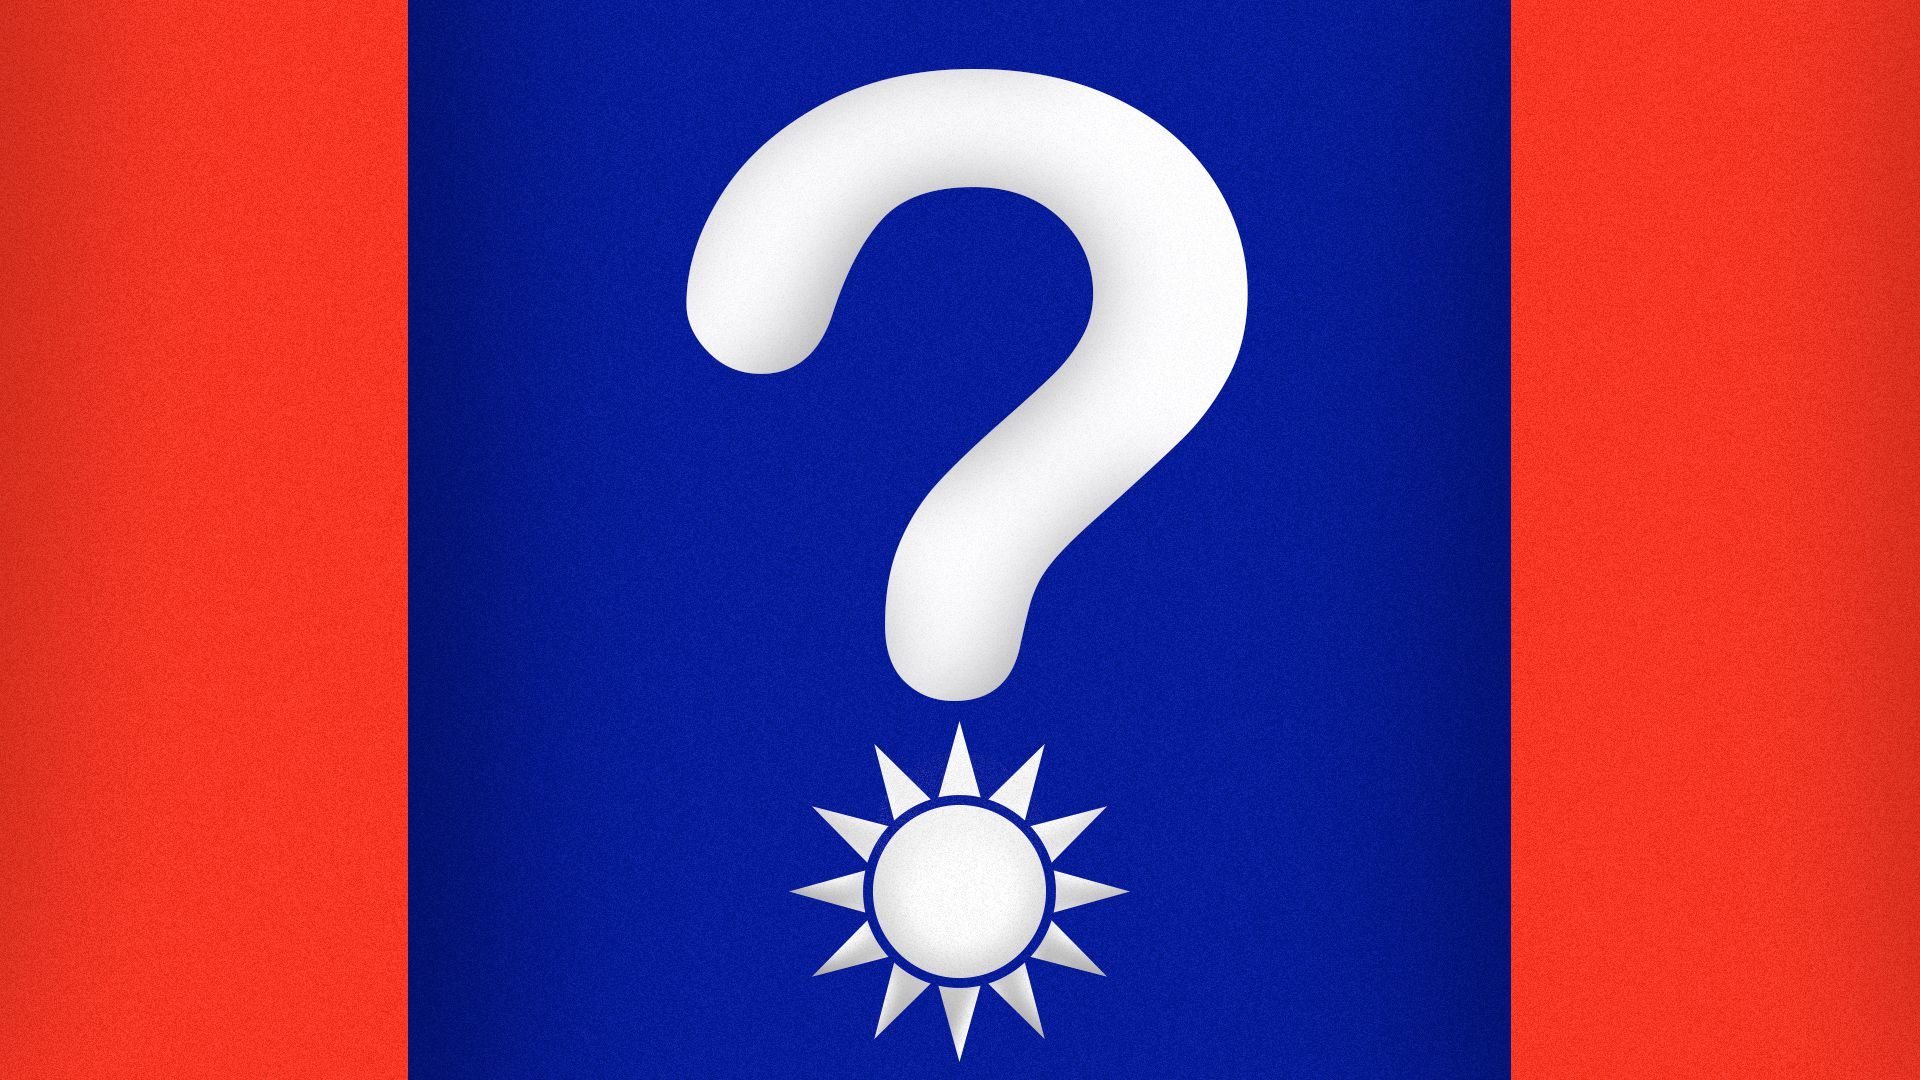 Illustration of a question mark stylized with the sun from the Taiwanese flag as the dot. 